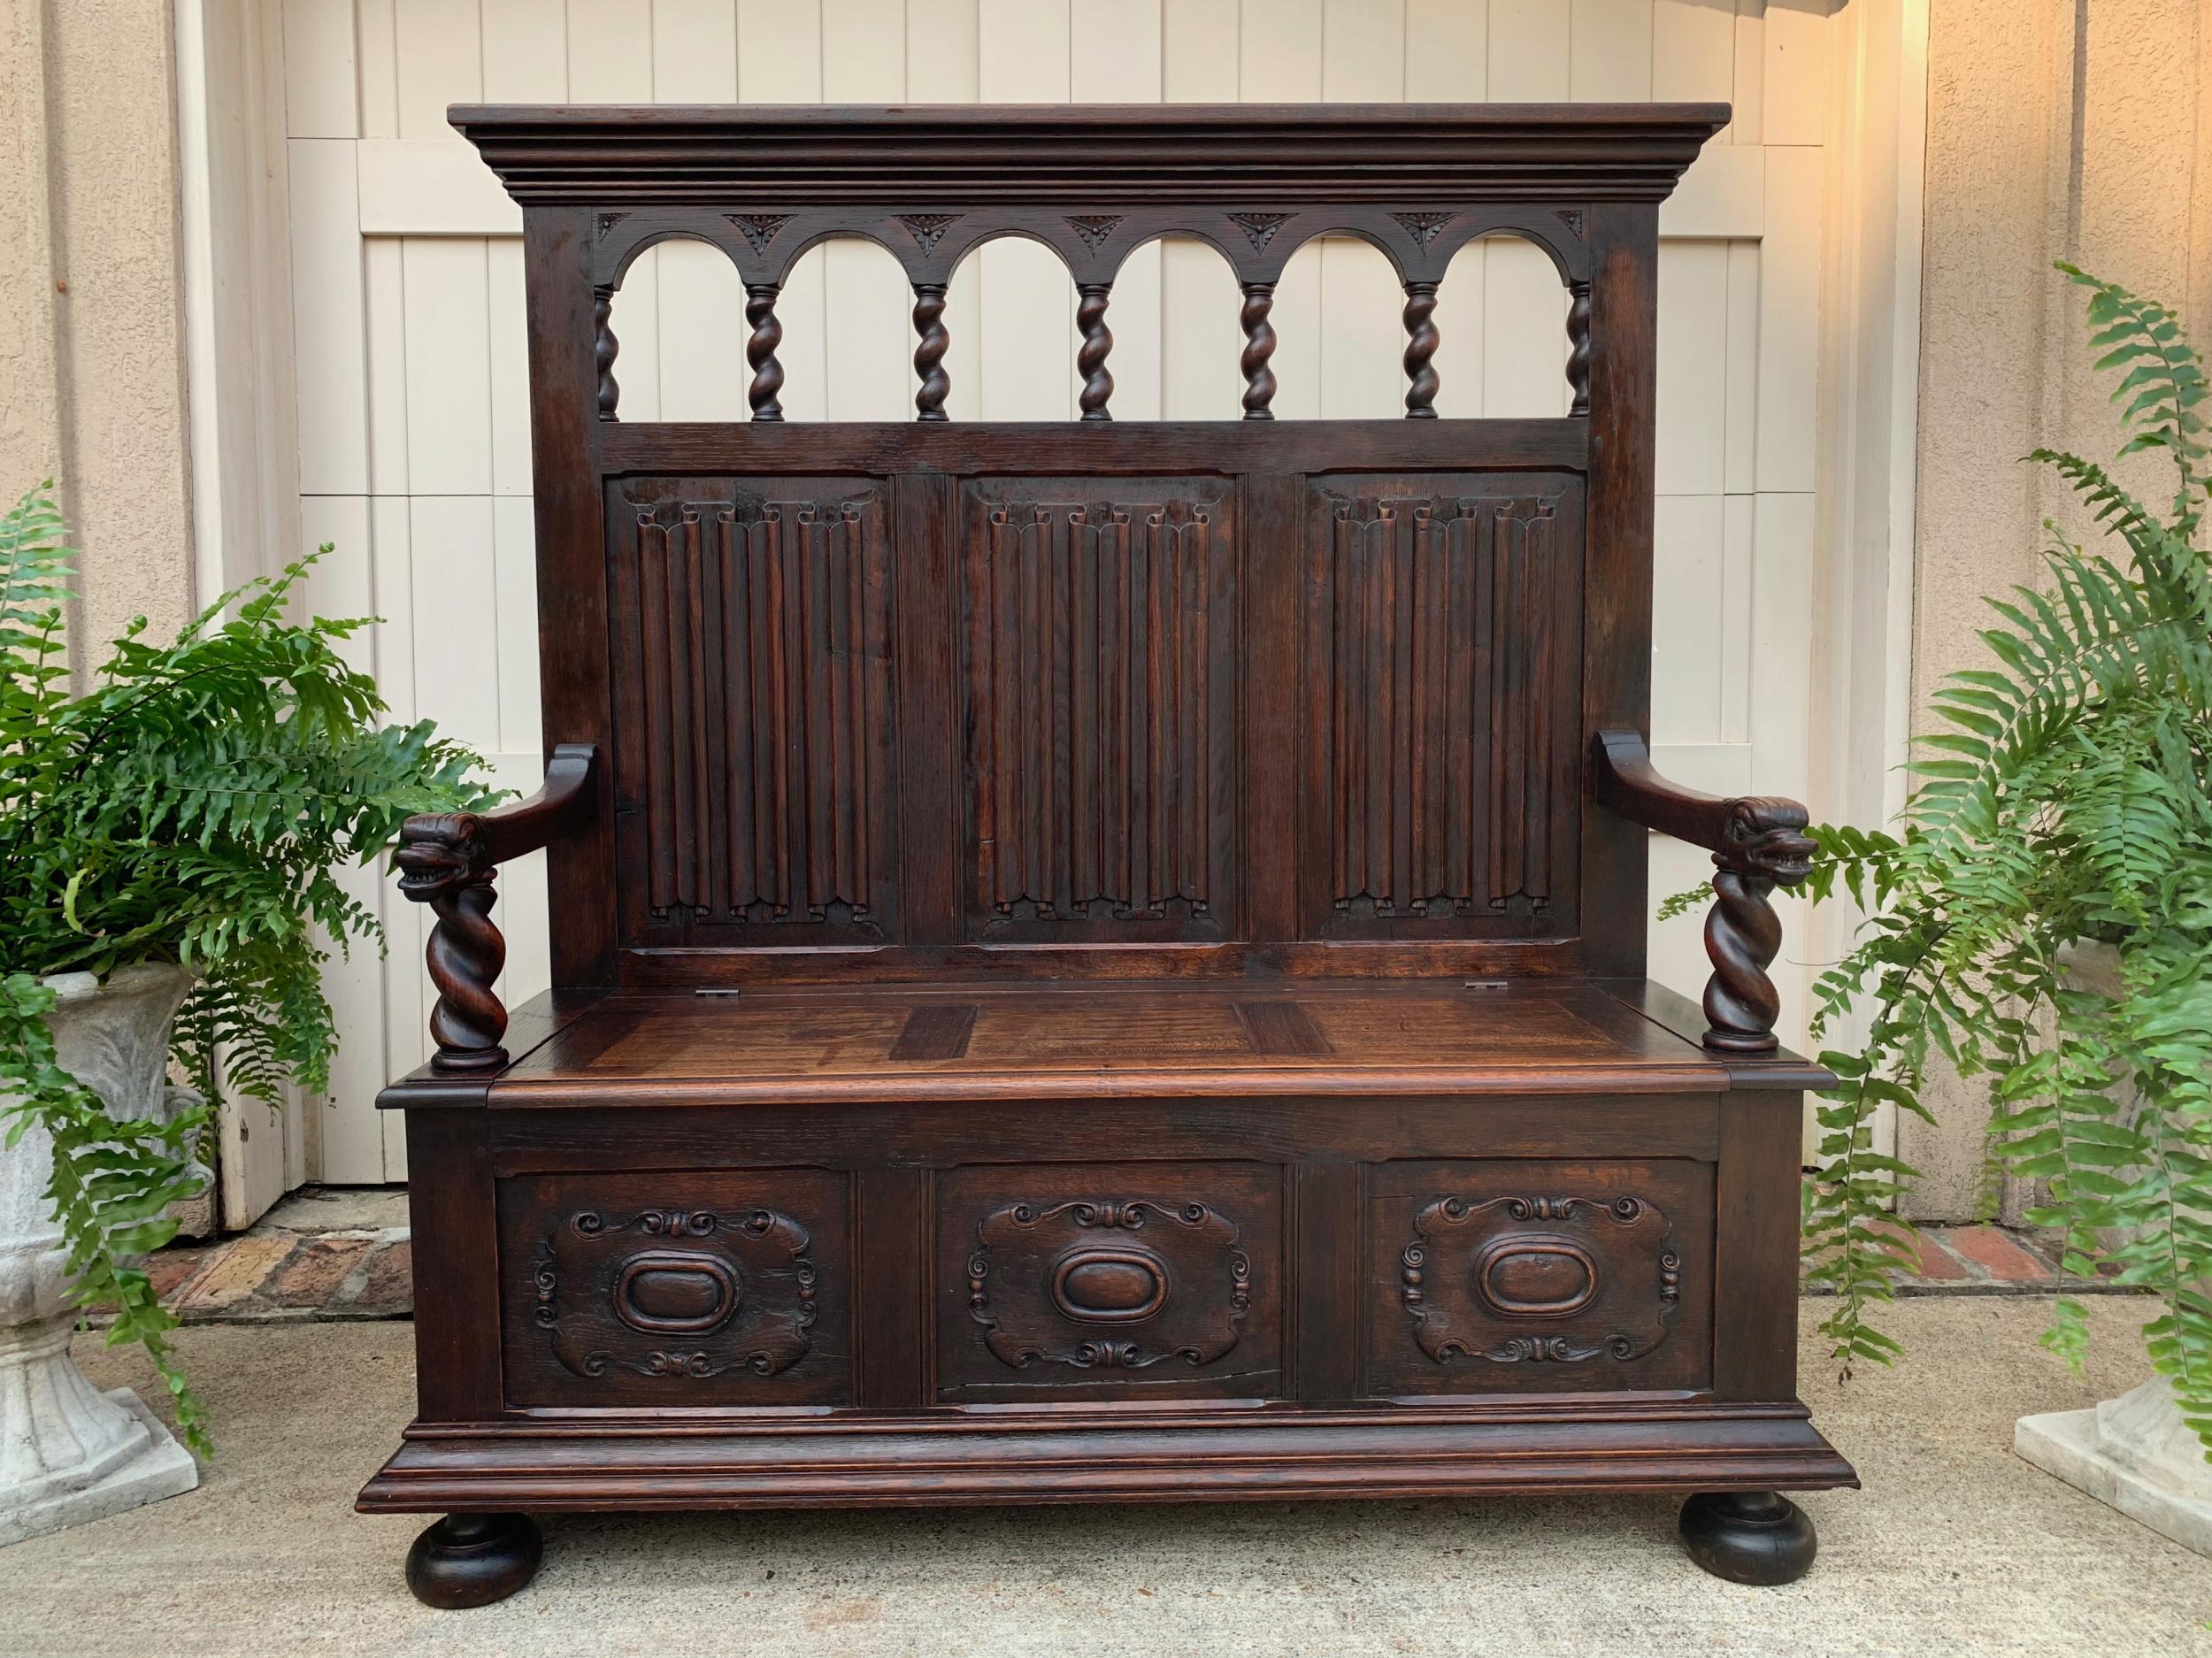 19th century antique French carved oak hall bench pew chest settle barley twist Renaissance

~Direct from France~
~Large antique French carved hall bench, with gorgeous carved features~
~Large moulding above the tall upper back panel with open